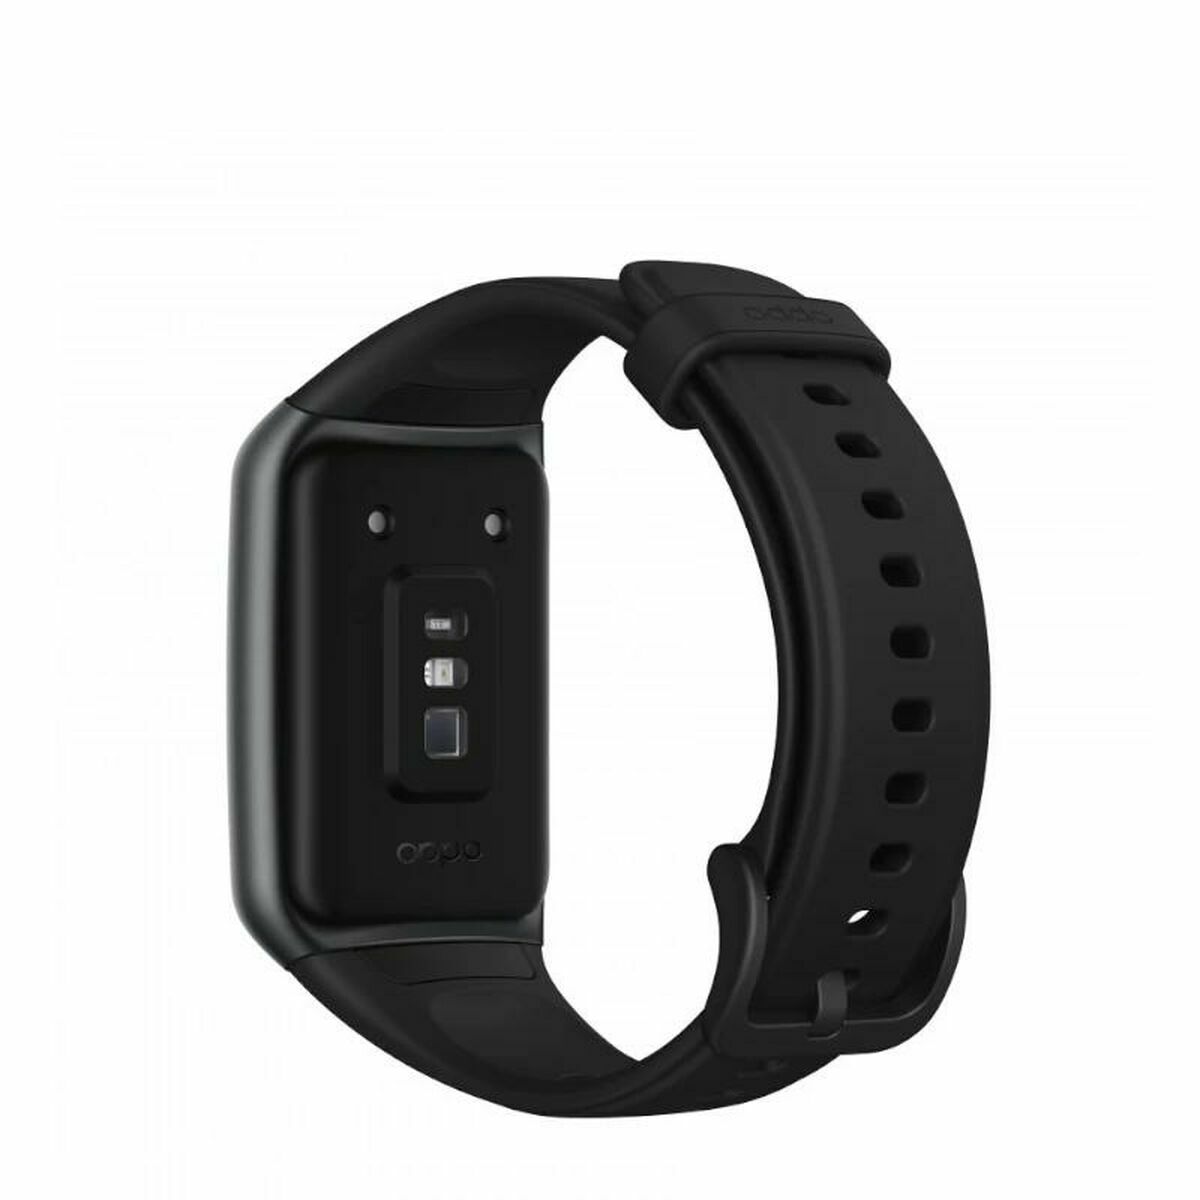 Smartwatch Oppo Band 2 1,57" Black, Oppo, Electronics, smartwatch-oppo-band-2-1-57-black-1, Brand_Oppo, category-reference-2609, category-reference-2617, category-reference-2634, category-reference-t-19653, Condition_NEW, original gifts, Price_50 - 100, telephones & tablets, Teleworking, wifi y bluetooth, RiotNook